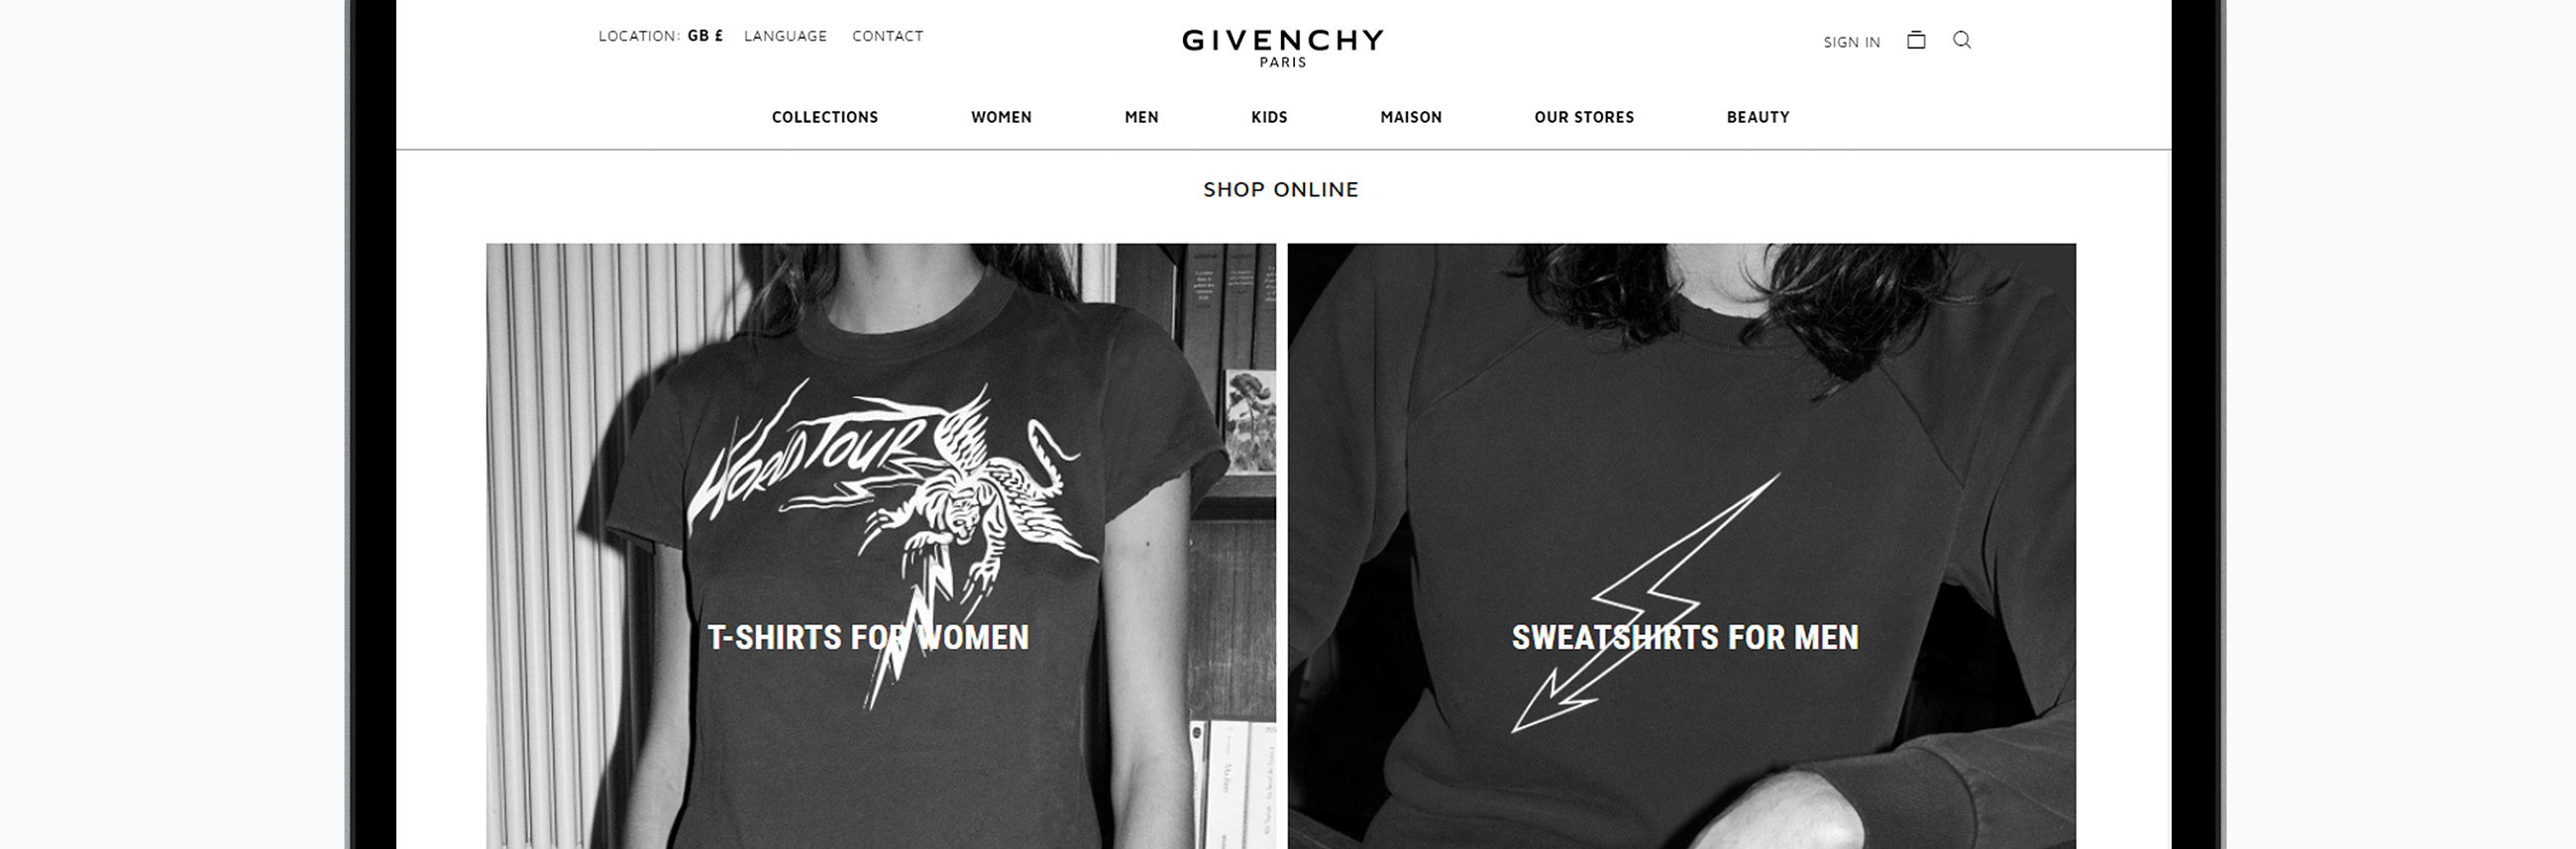 GIVENCHY ROLLS OUT E-COMMERCE PLATFORM TO NEW EUROPEAN MARKETS